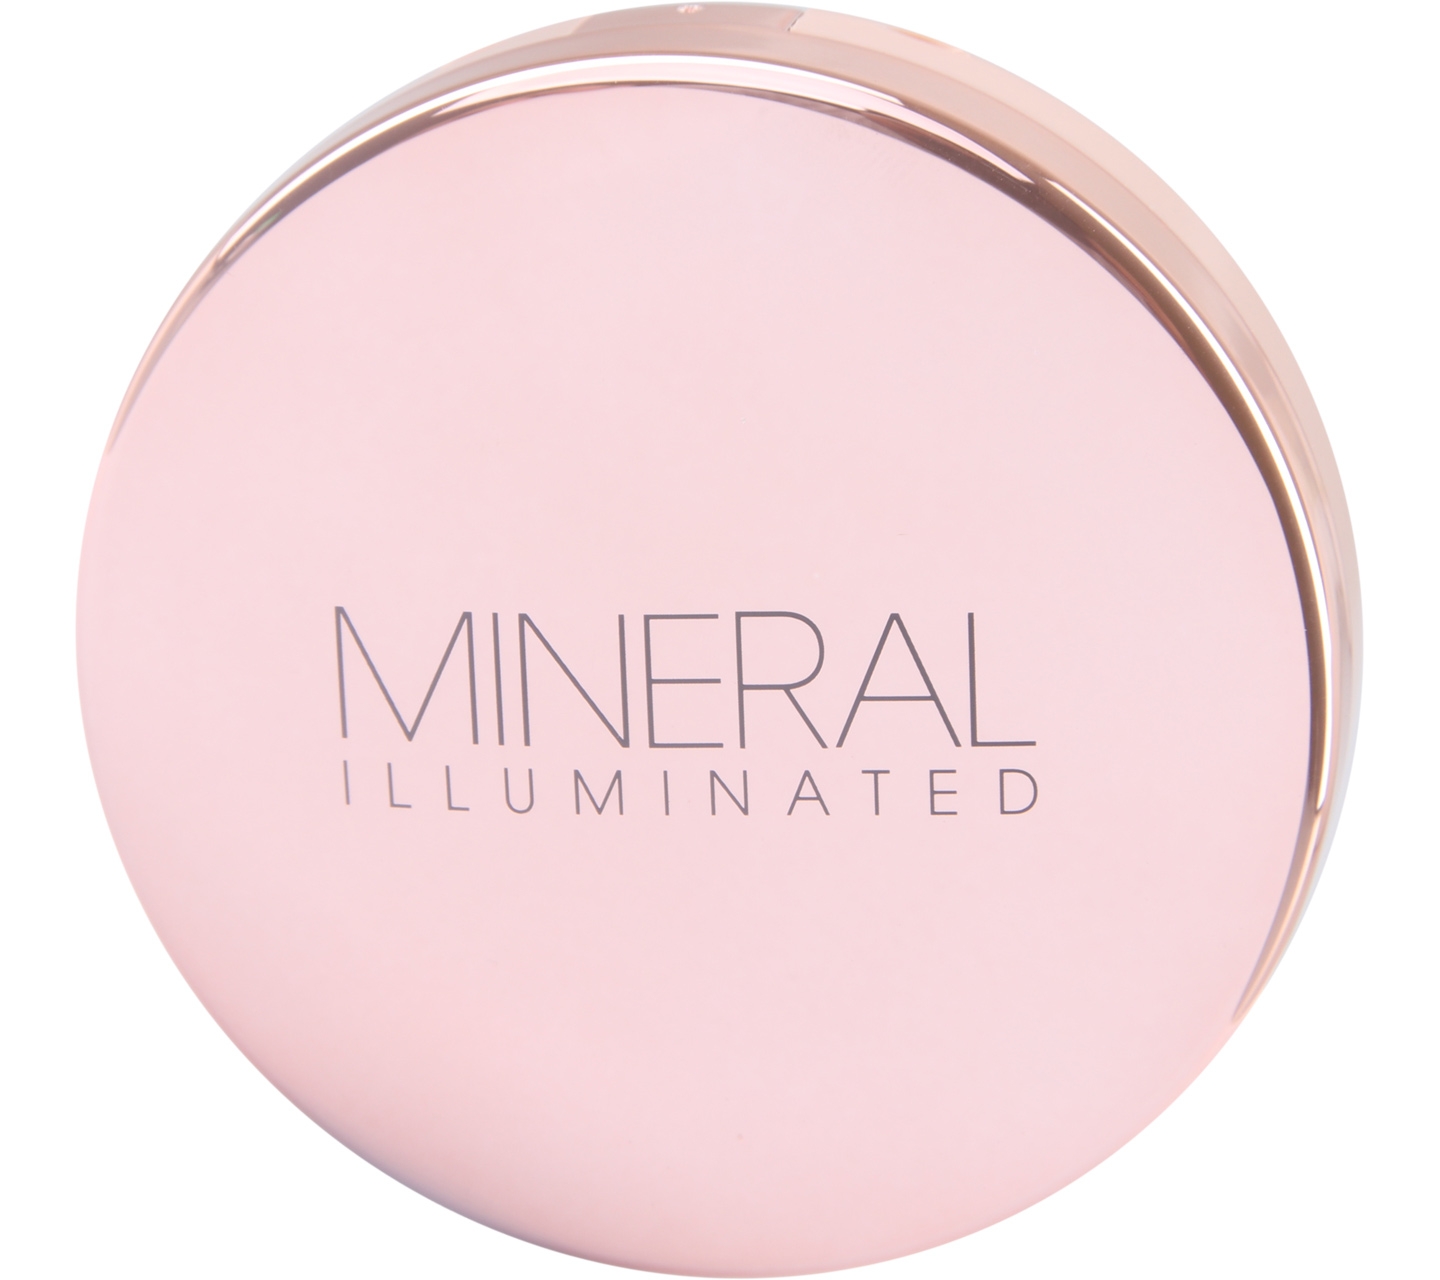 Mineral Illuminated 02 Blending Rose Faces